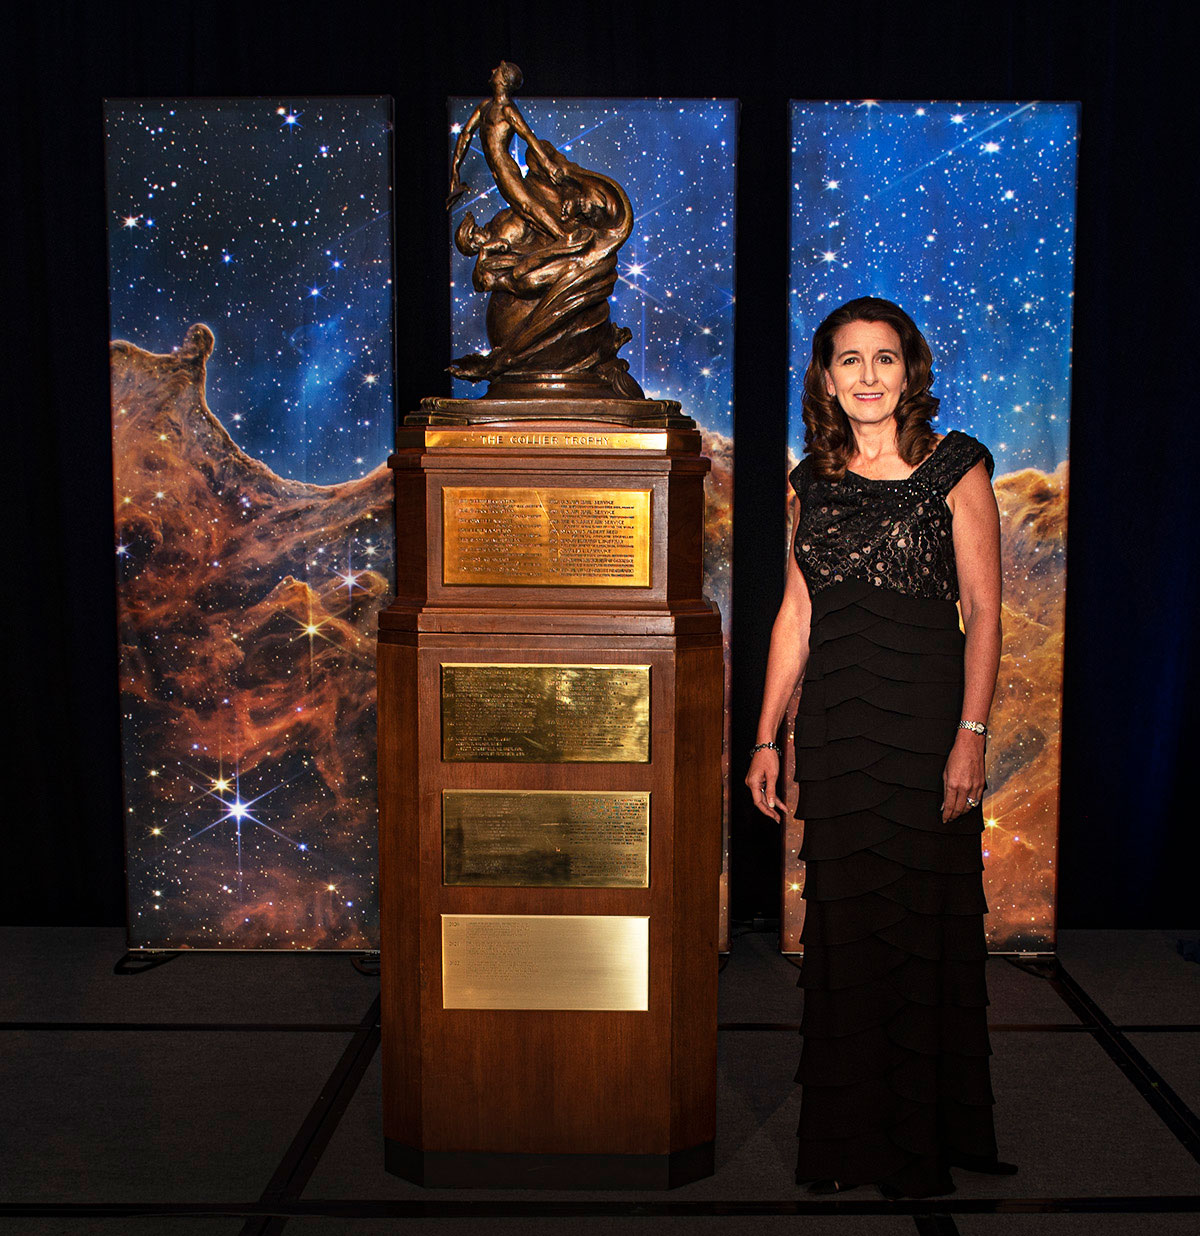 woman in gown standing next to large trophy